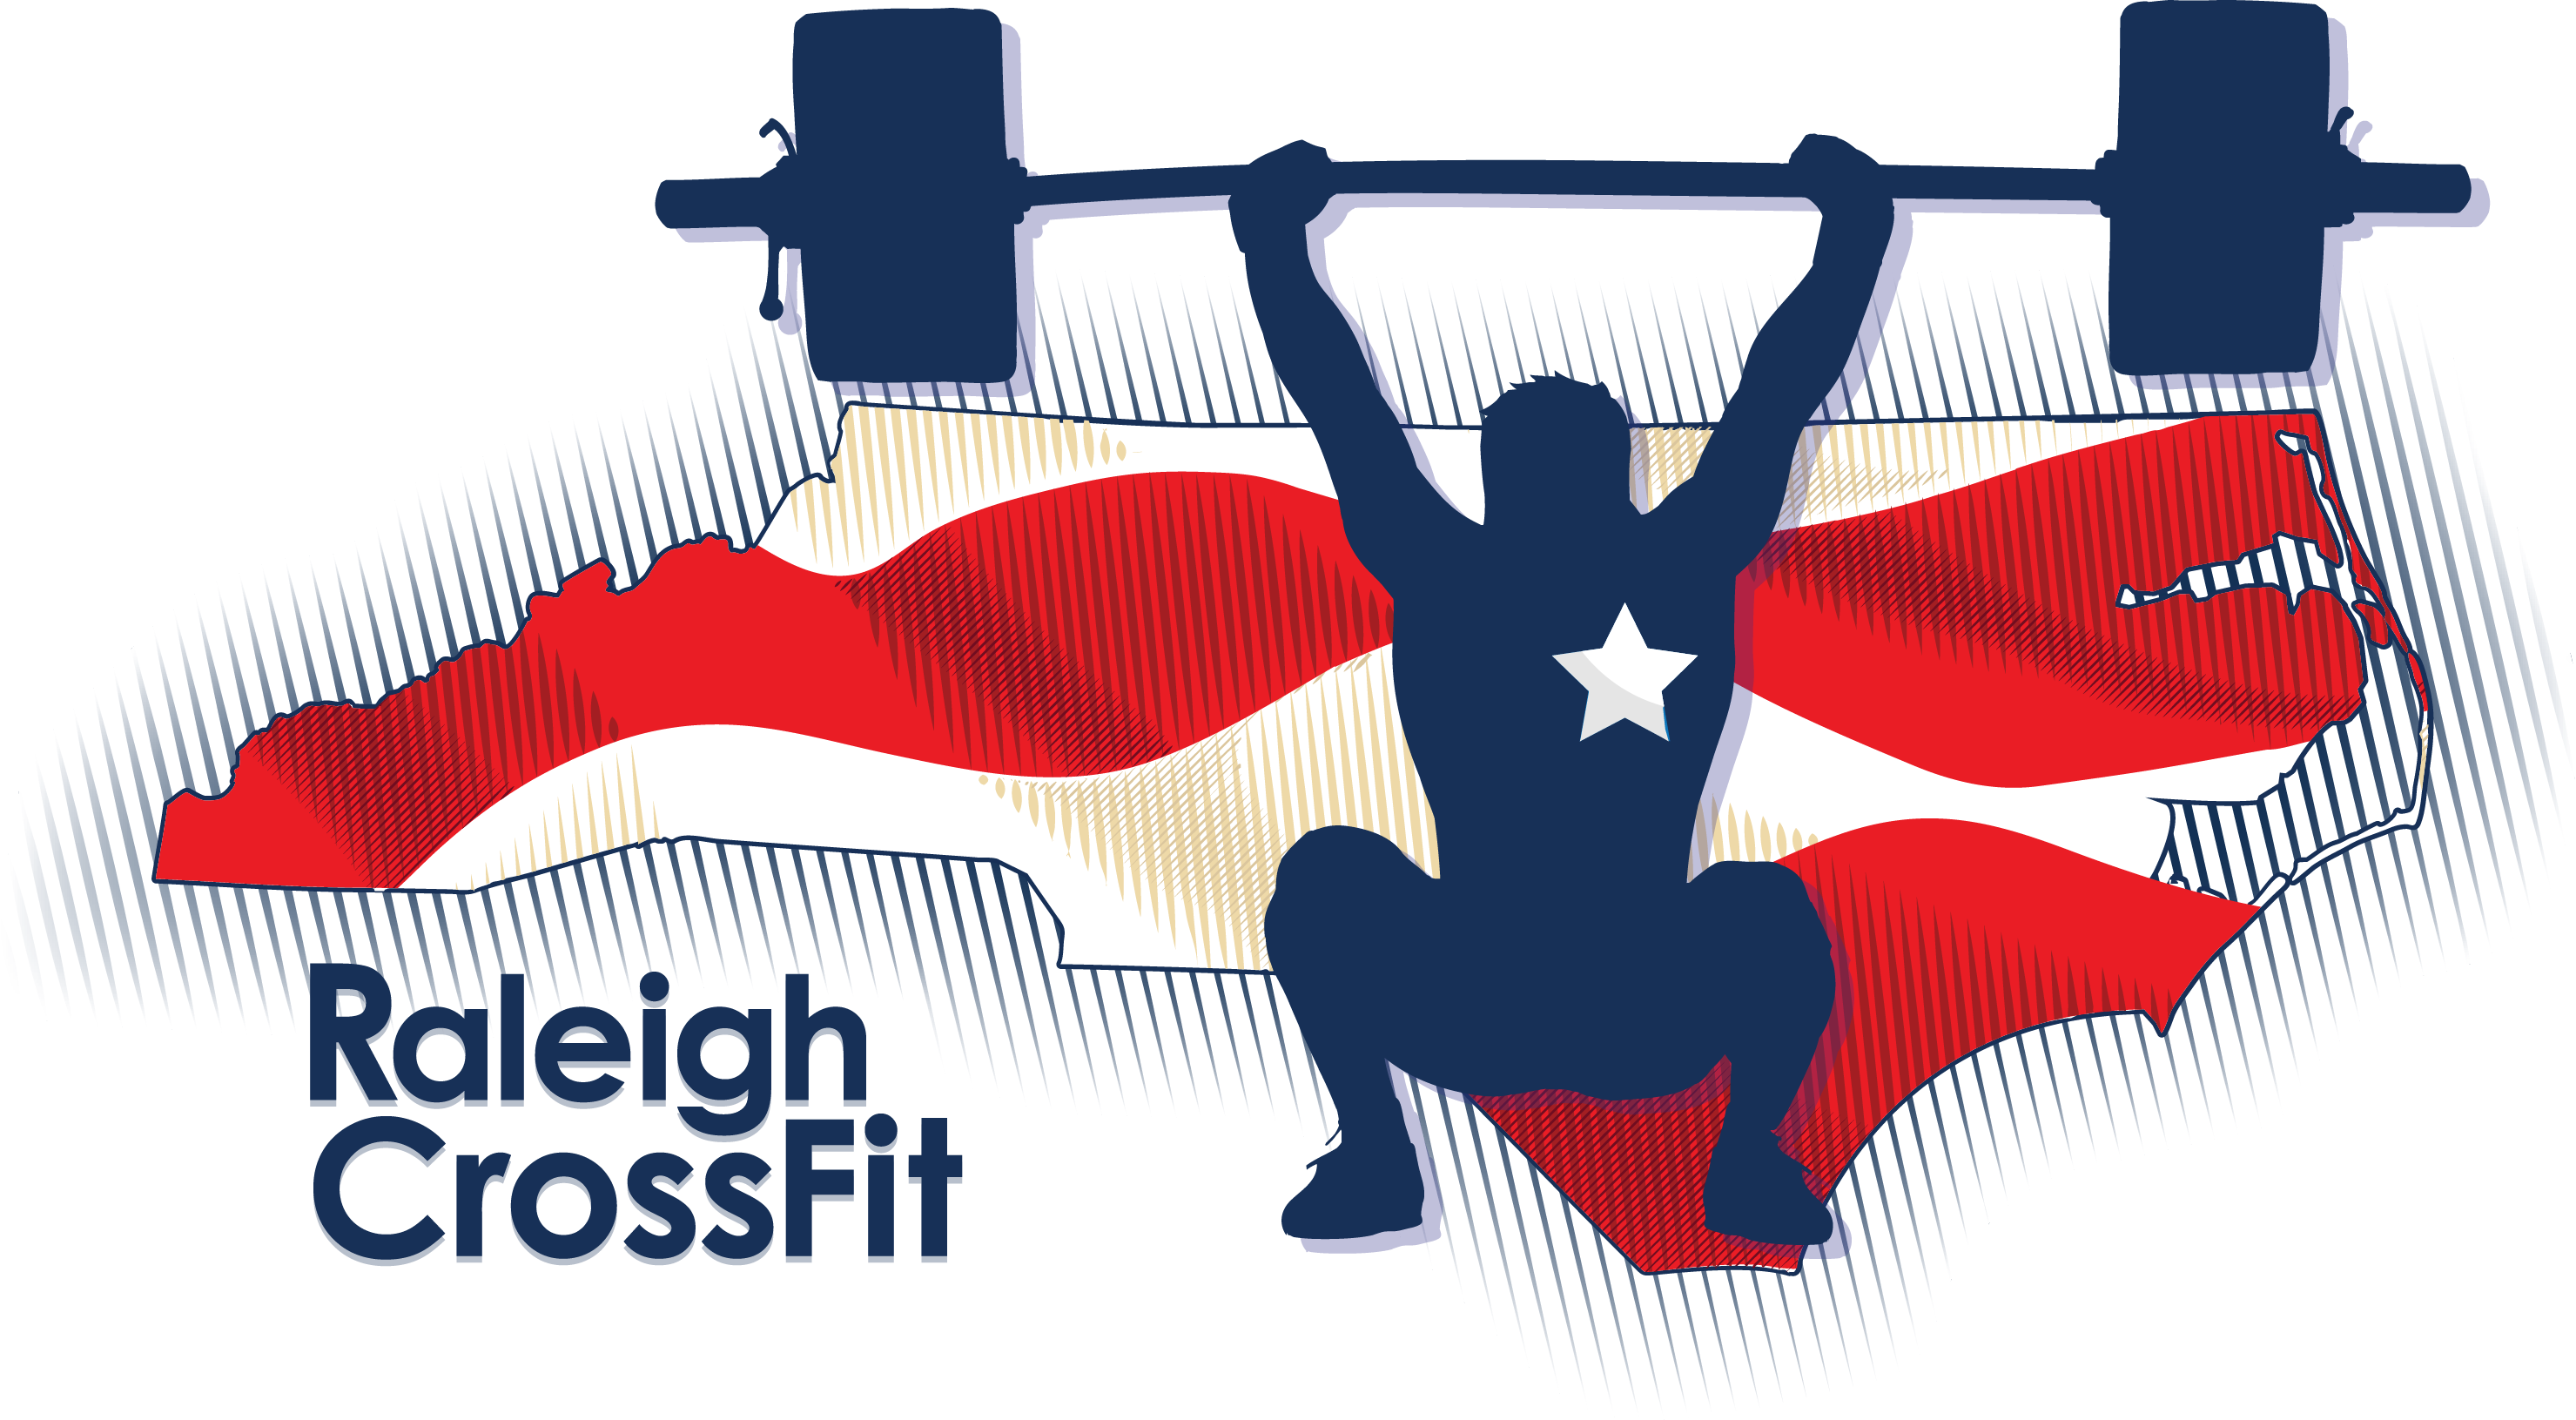 olympic clipart resistance training